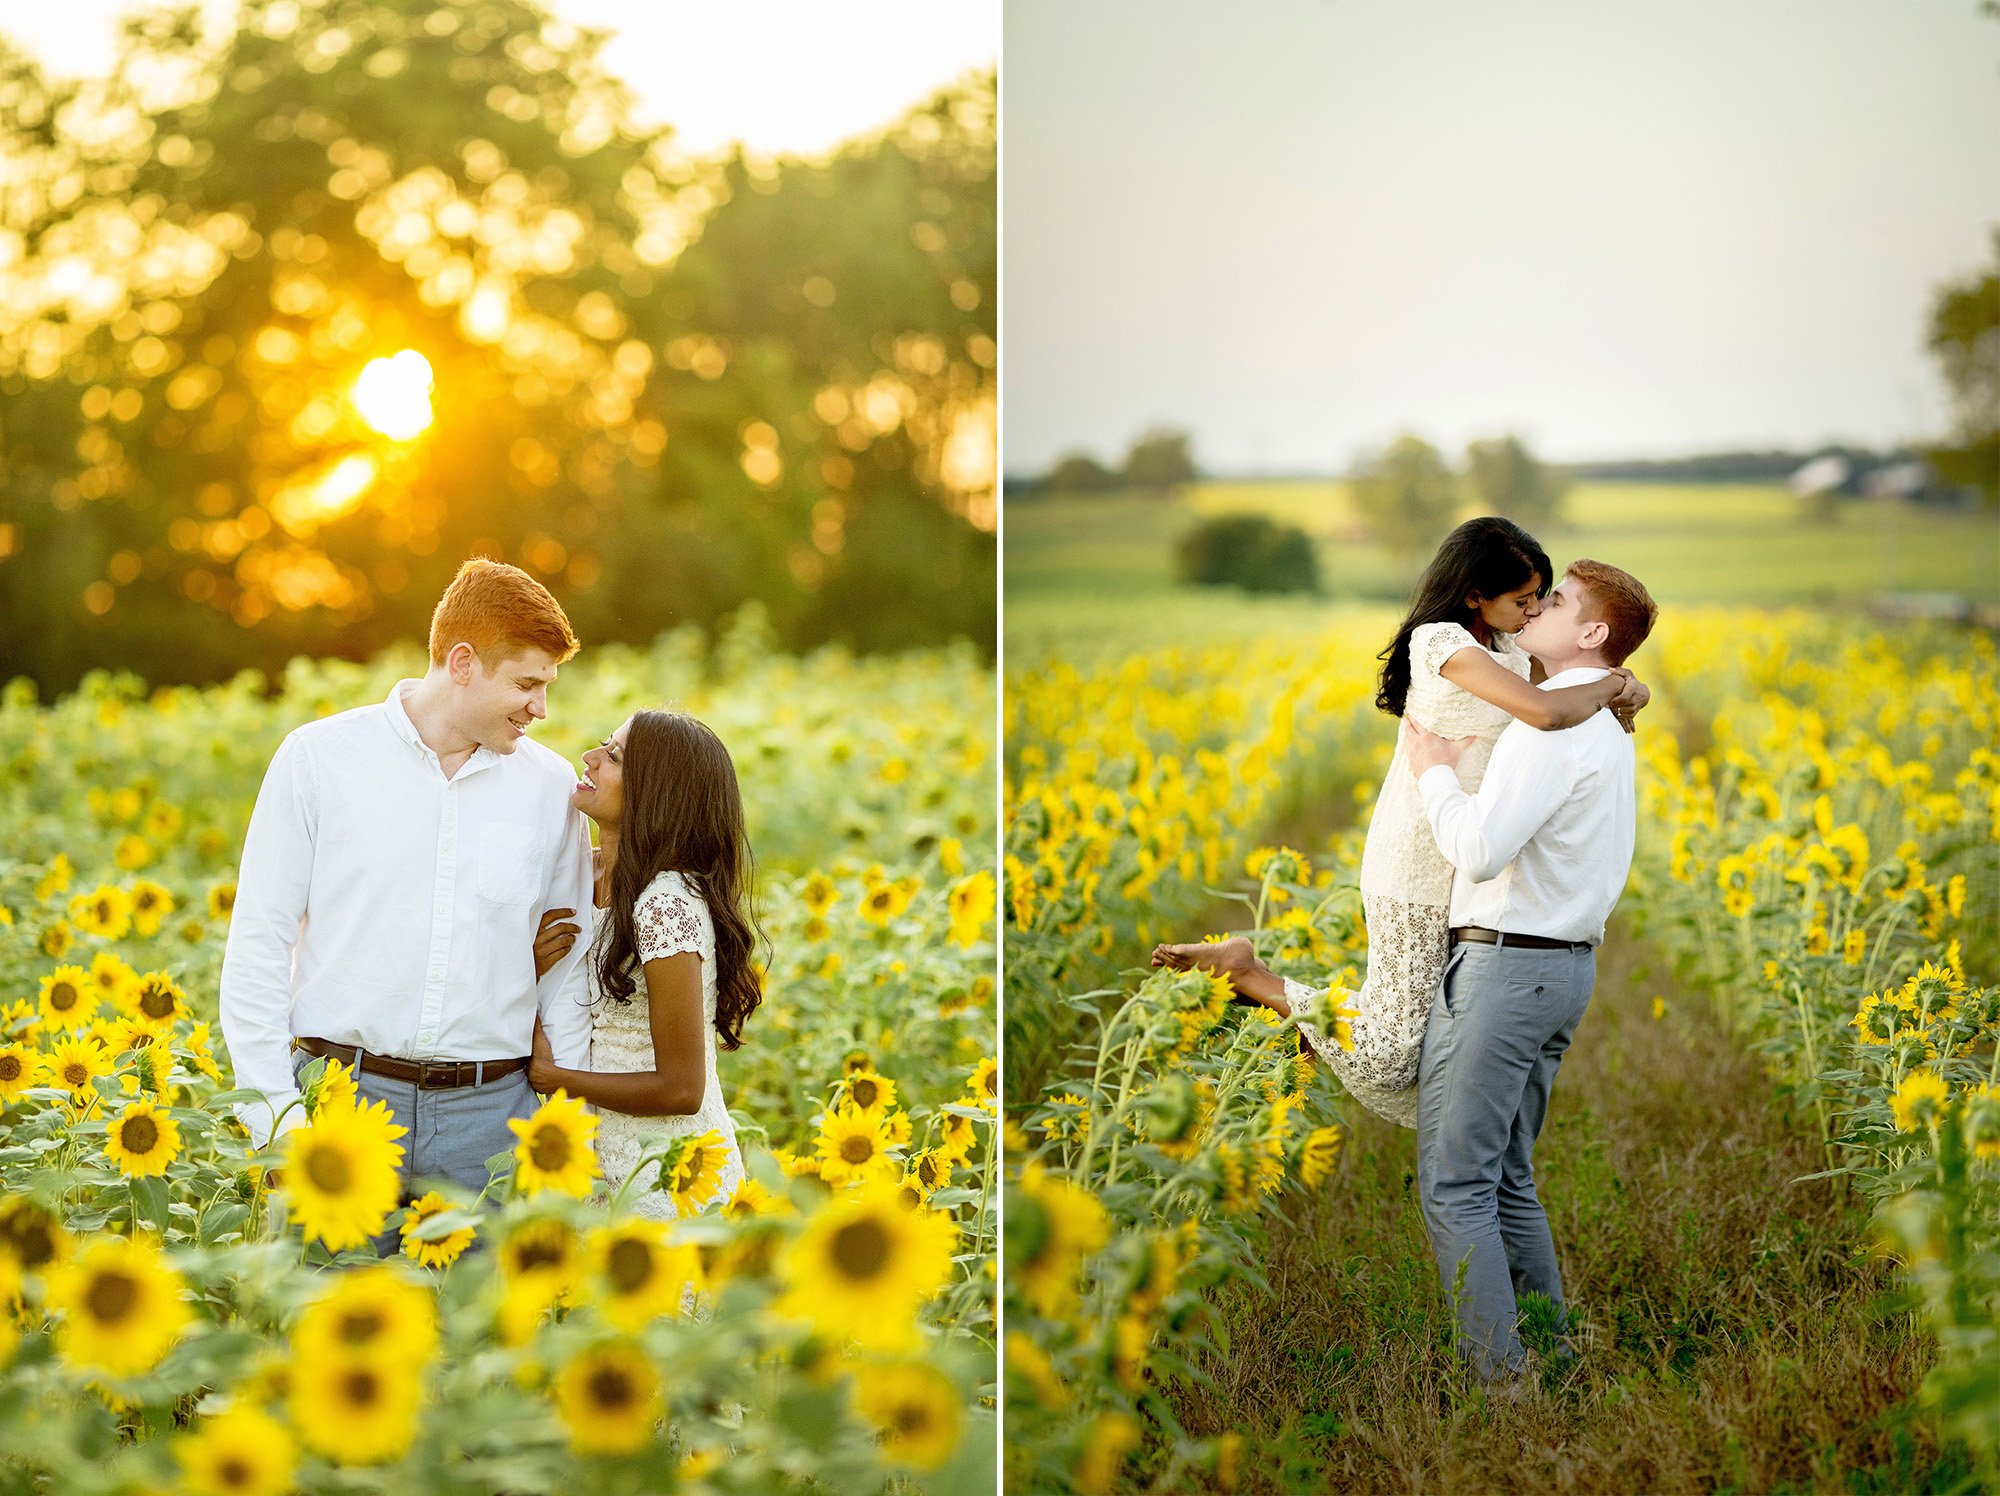 Seriously_Sabrina_Photography_Lexington_Midway_Kentucky_Engagement_Merefield_Sunflowers_Naz_and_Drew13.jpg